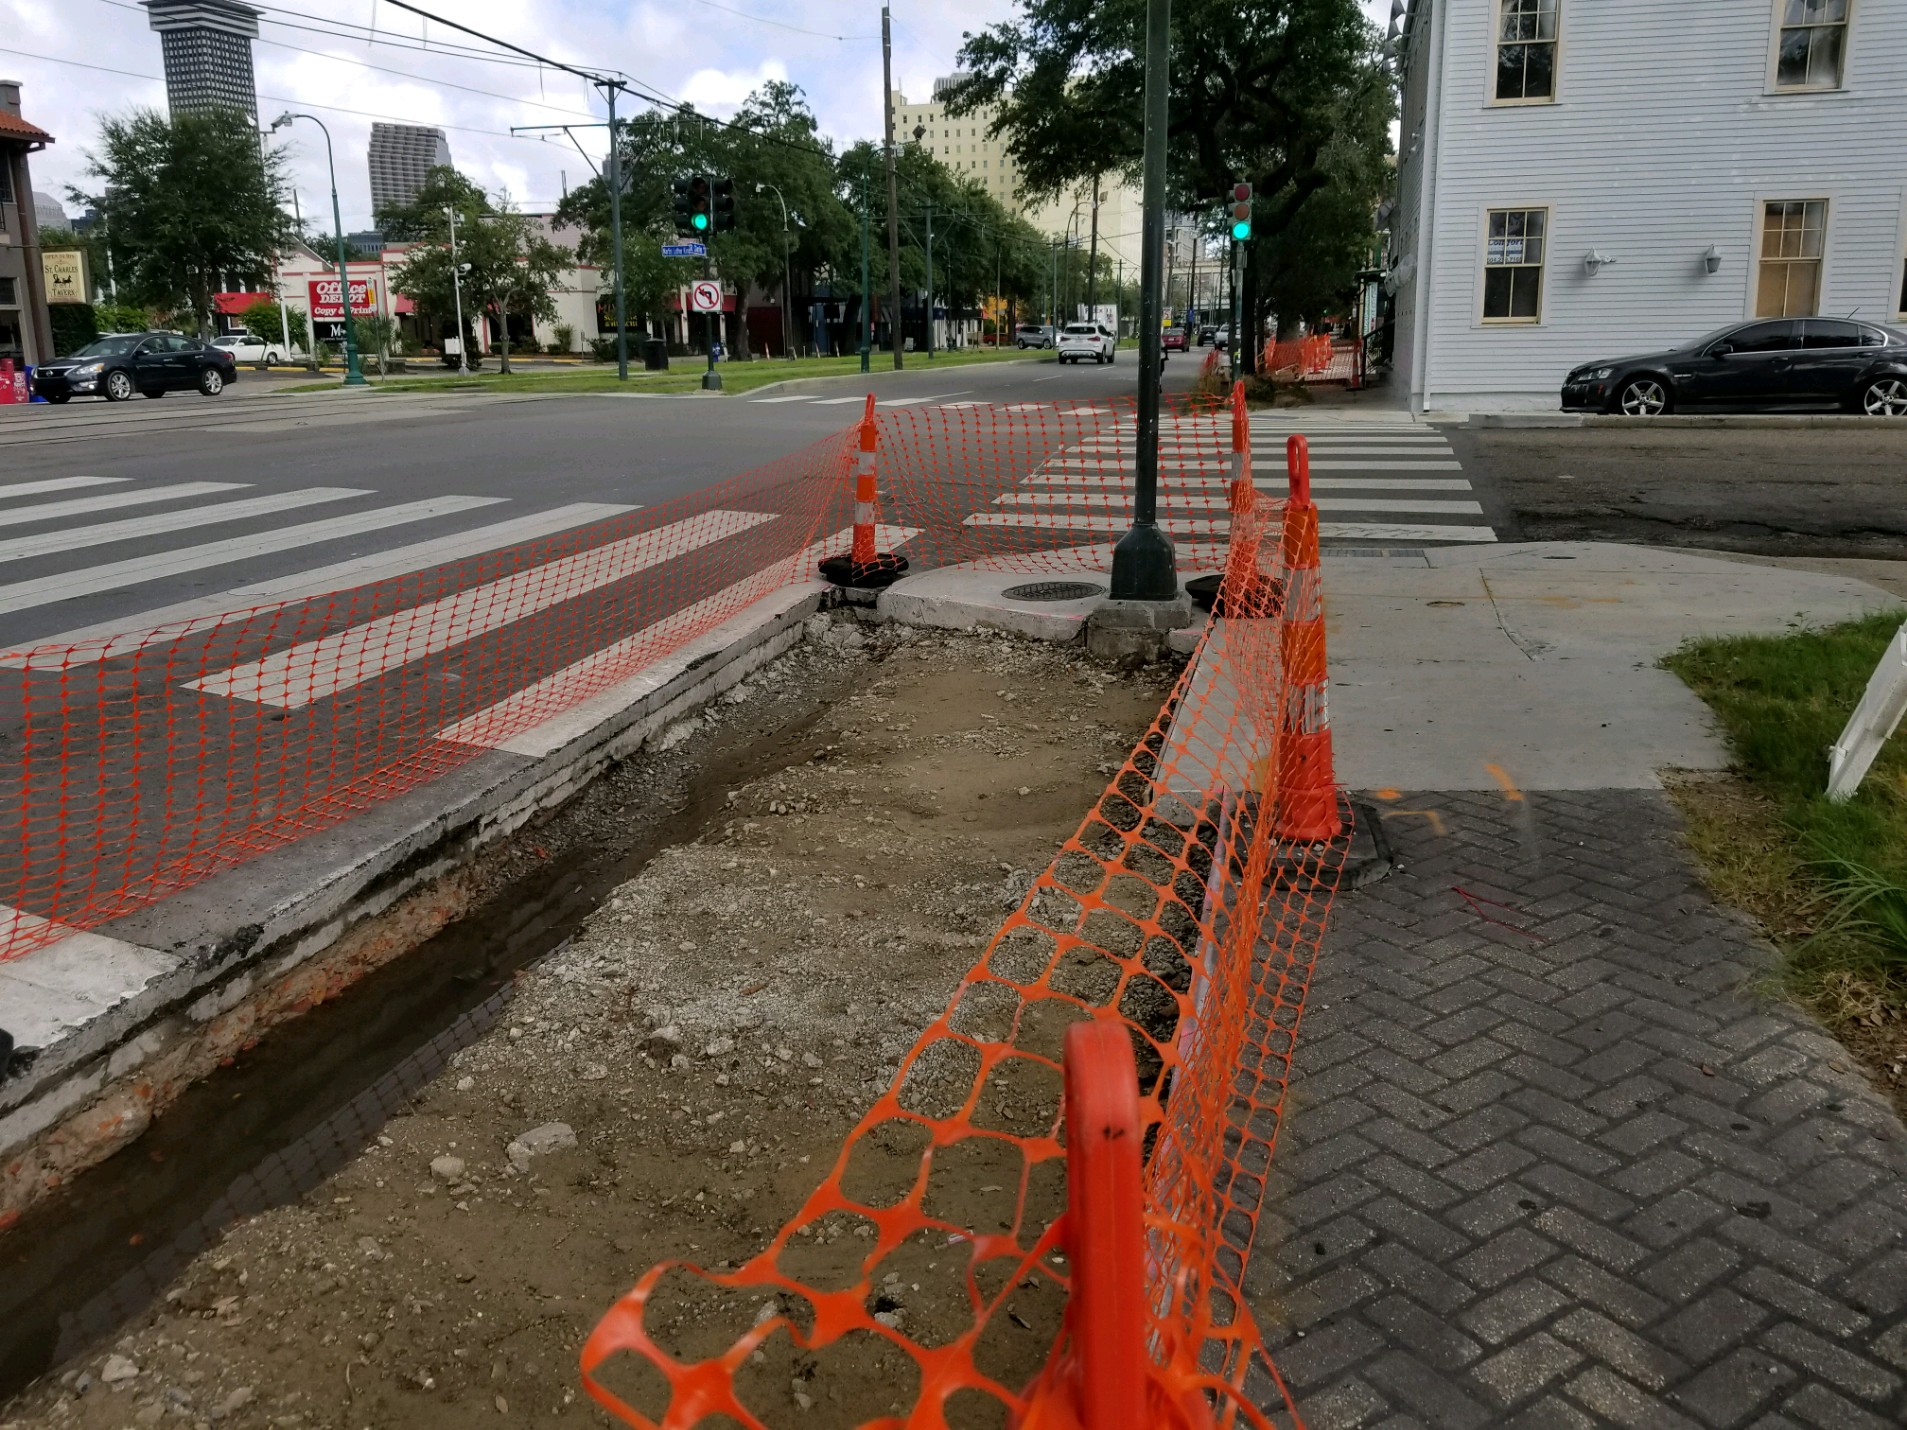 CREWS COMPLETE CURBS AND AMERICANS WITH DISABILITIES ACT-COMPLIANT RAMPS ON THE ST. CHARLES AVENUE MEDIAN